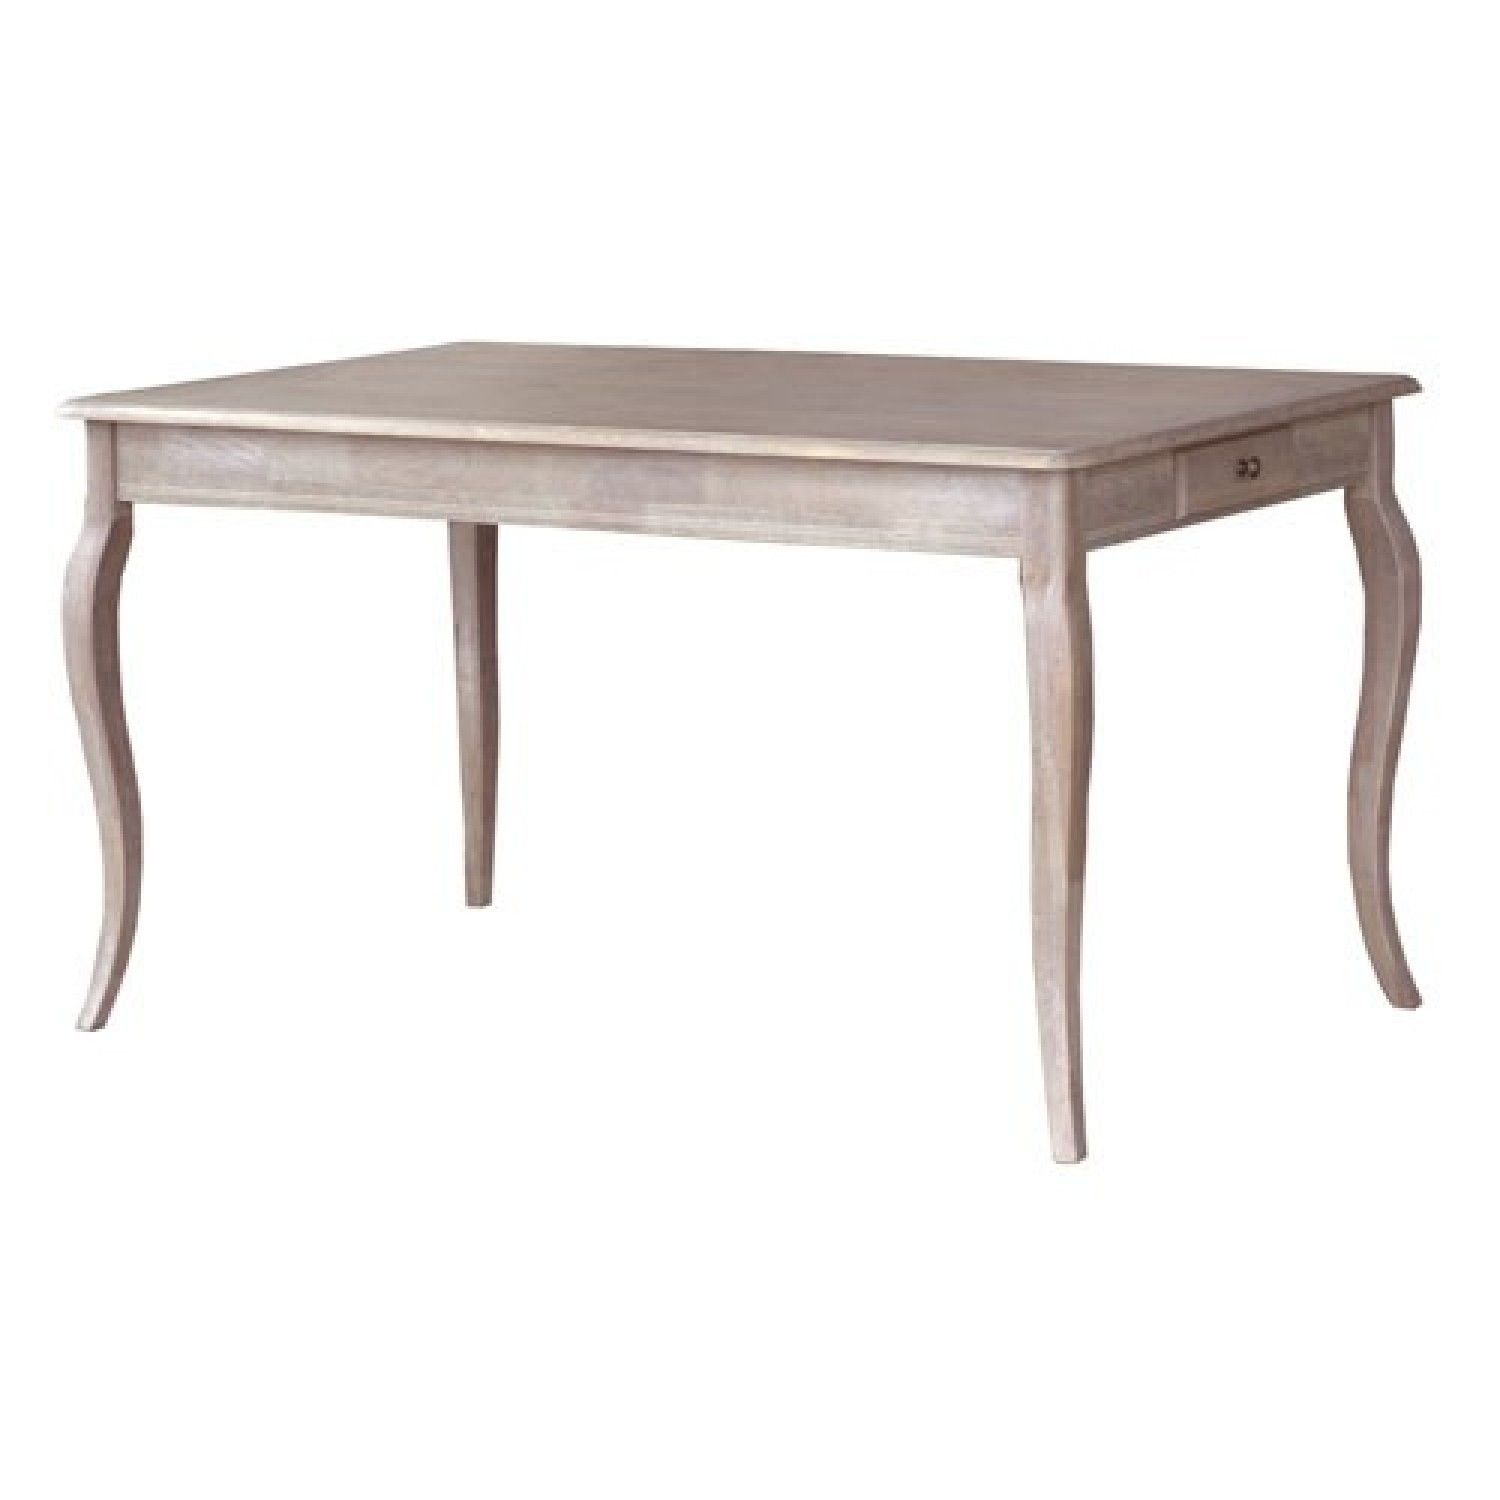 Lime Wash Coffee Table Inspirational Biarritz Dining Table Curved In Limewash Coffee Tables (View 23 of 30)